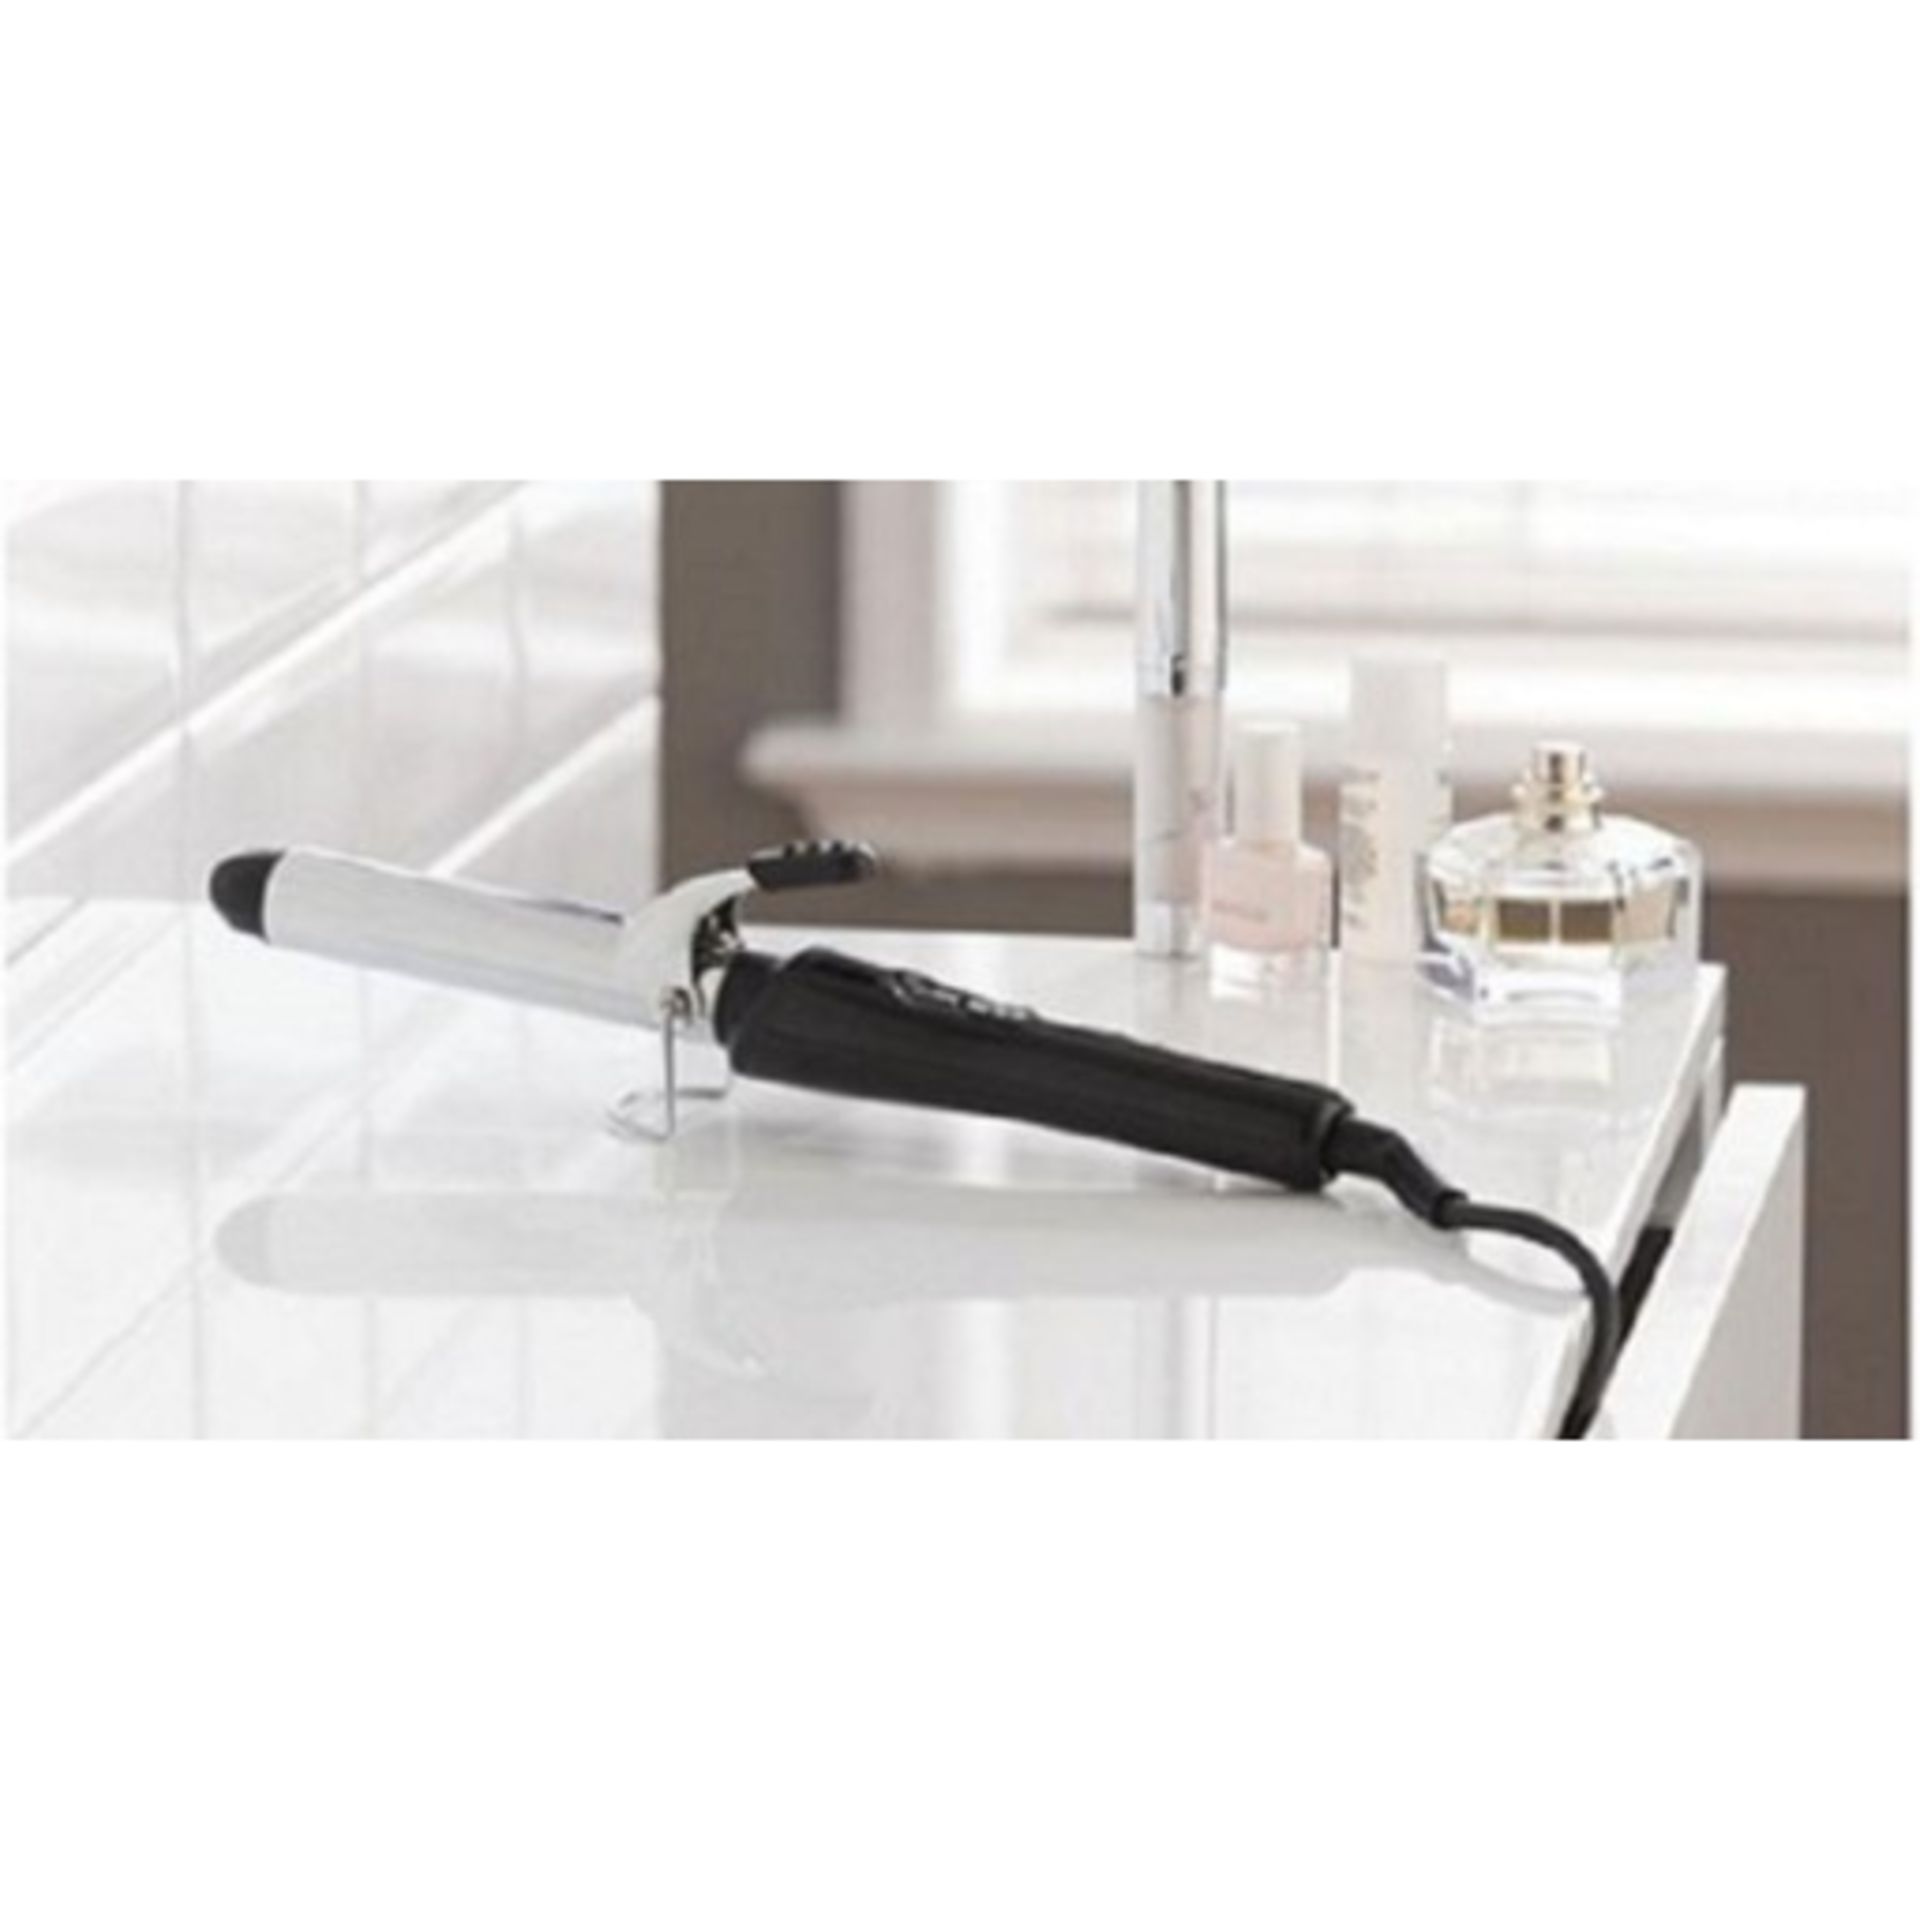 + VAT Brand New 25mm Curling Tongs with 2 meter Swivel Cord - Heats Up to 200 Degrees Celcius with